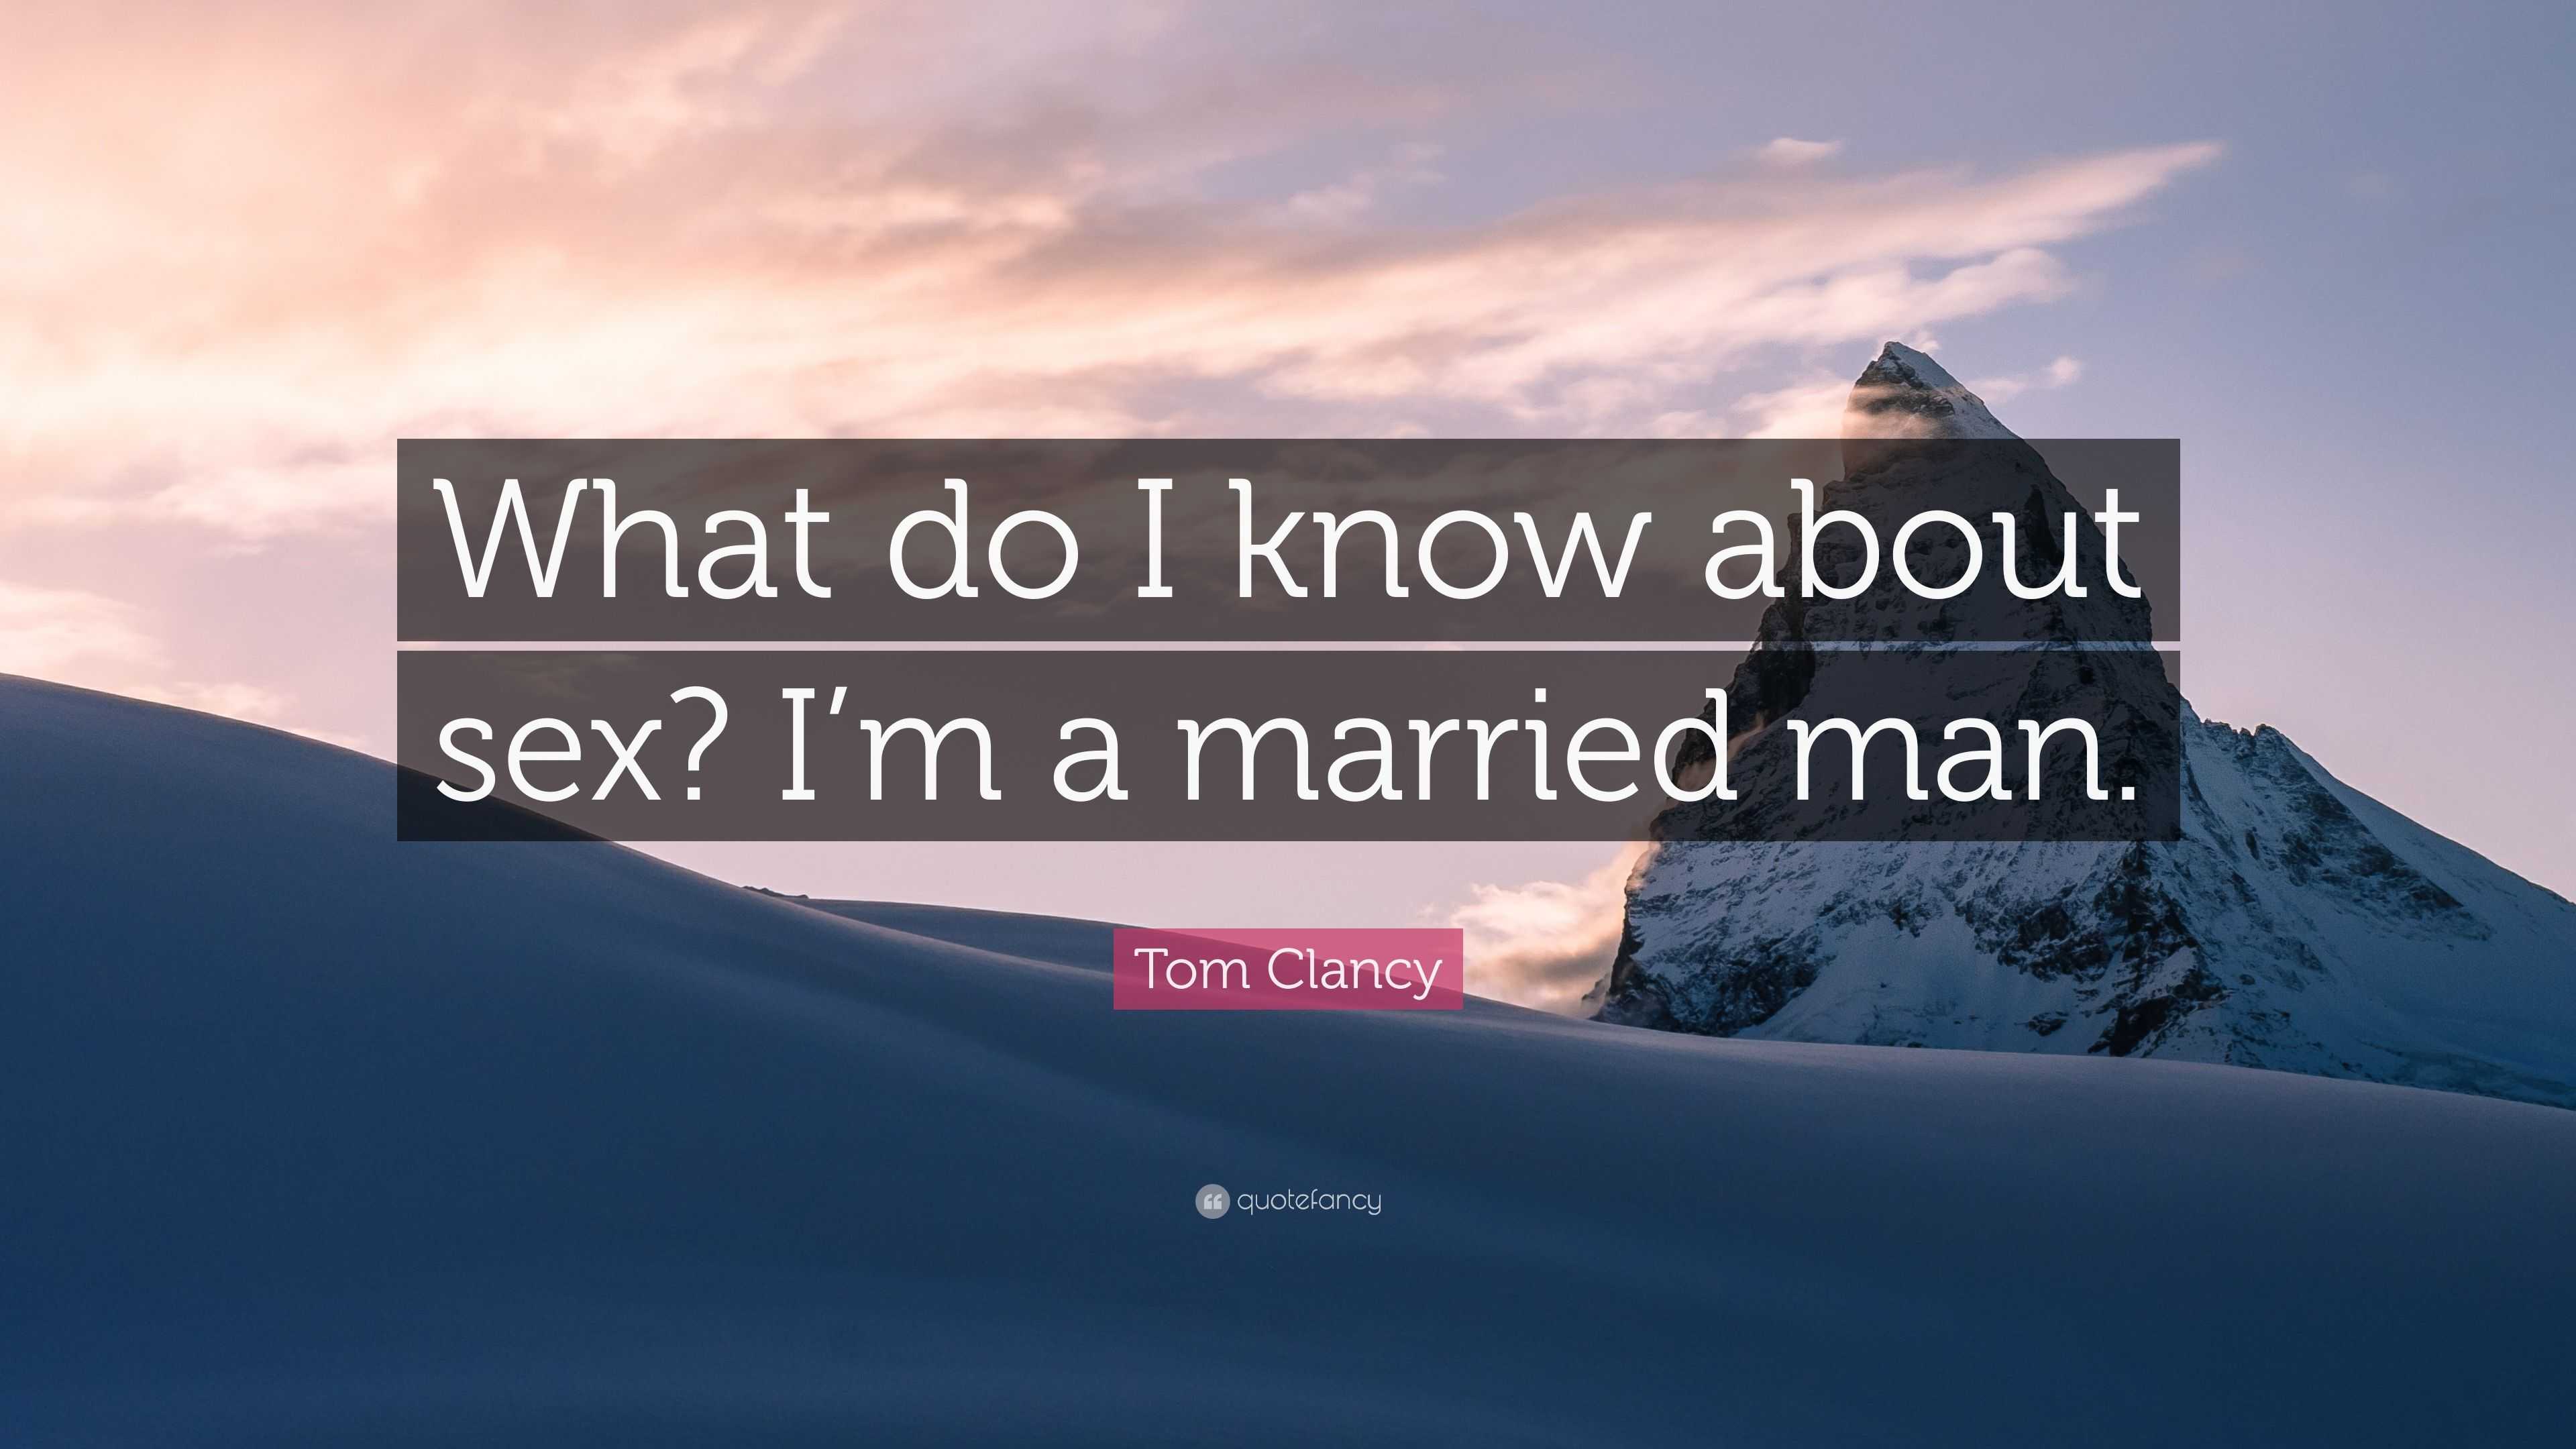 Tom Clancy Quote “What do I know about sex? Im a married man.” photo